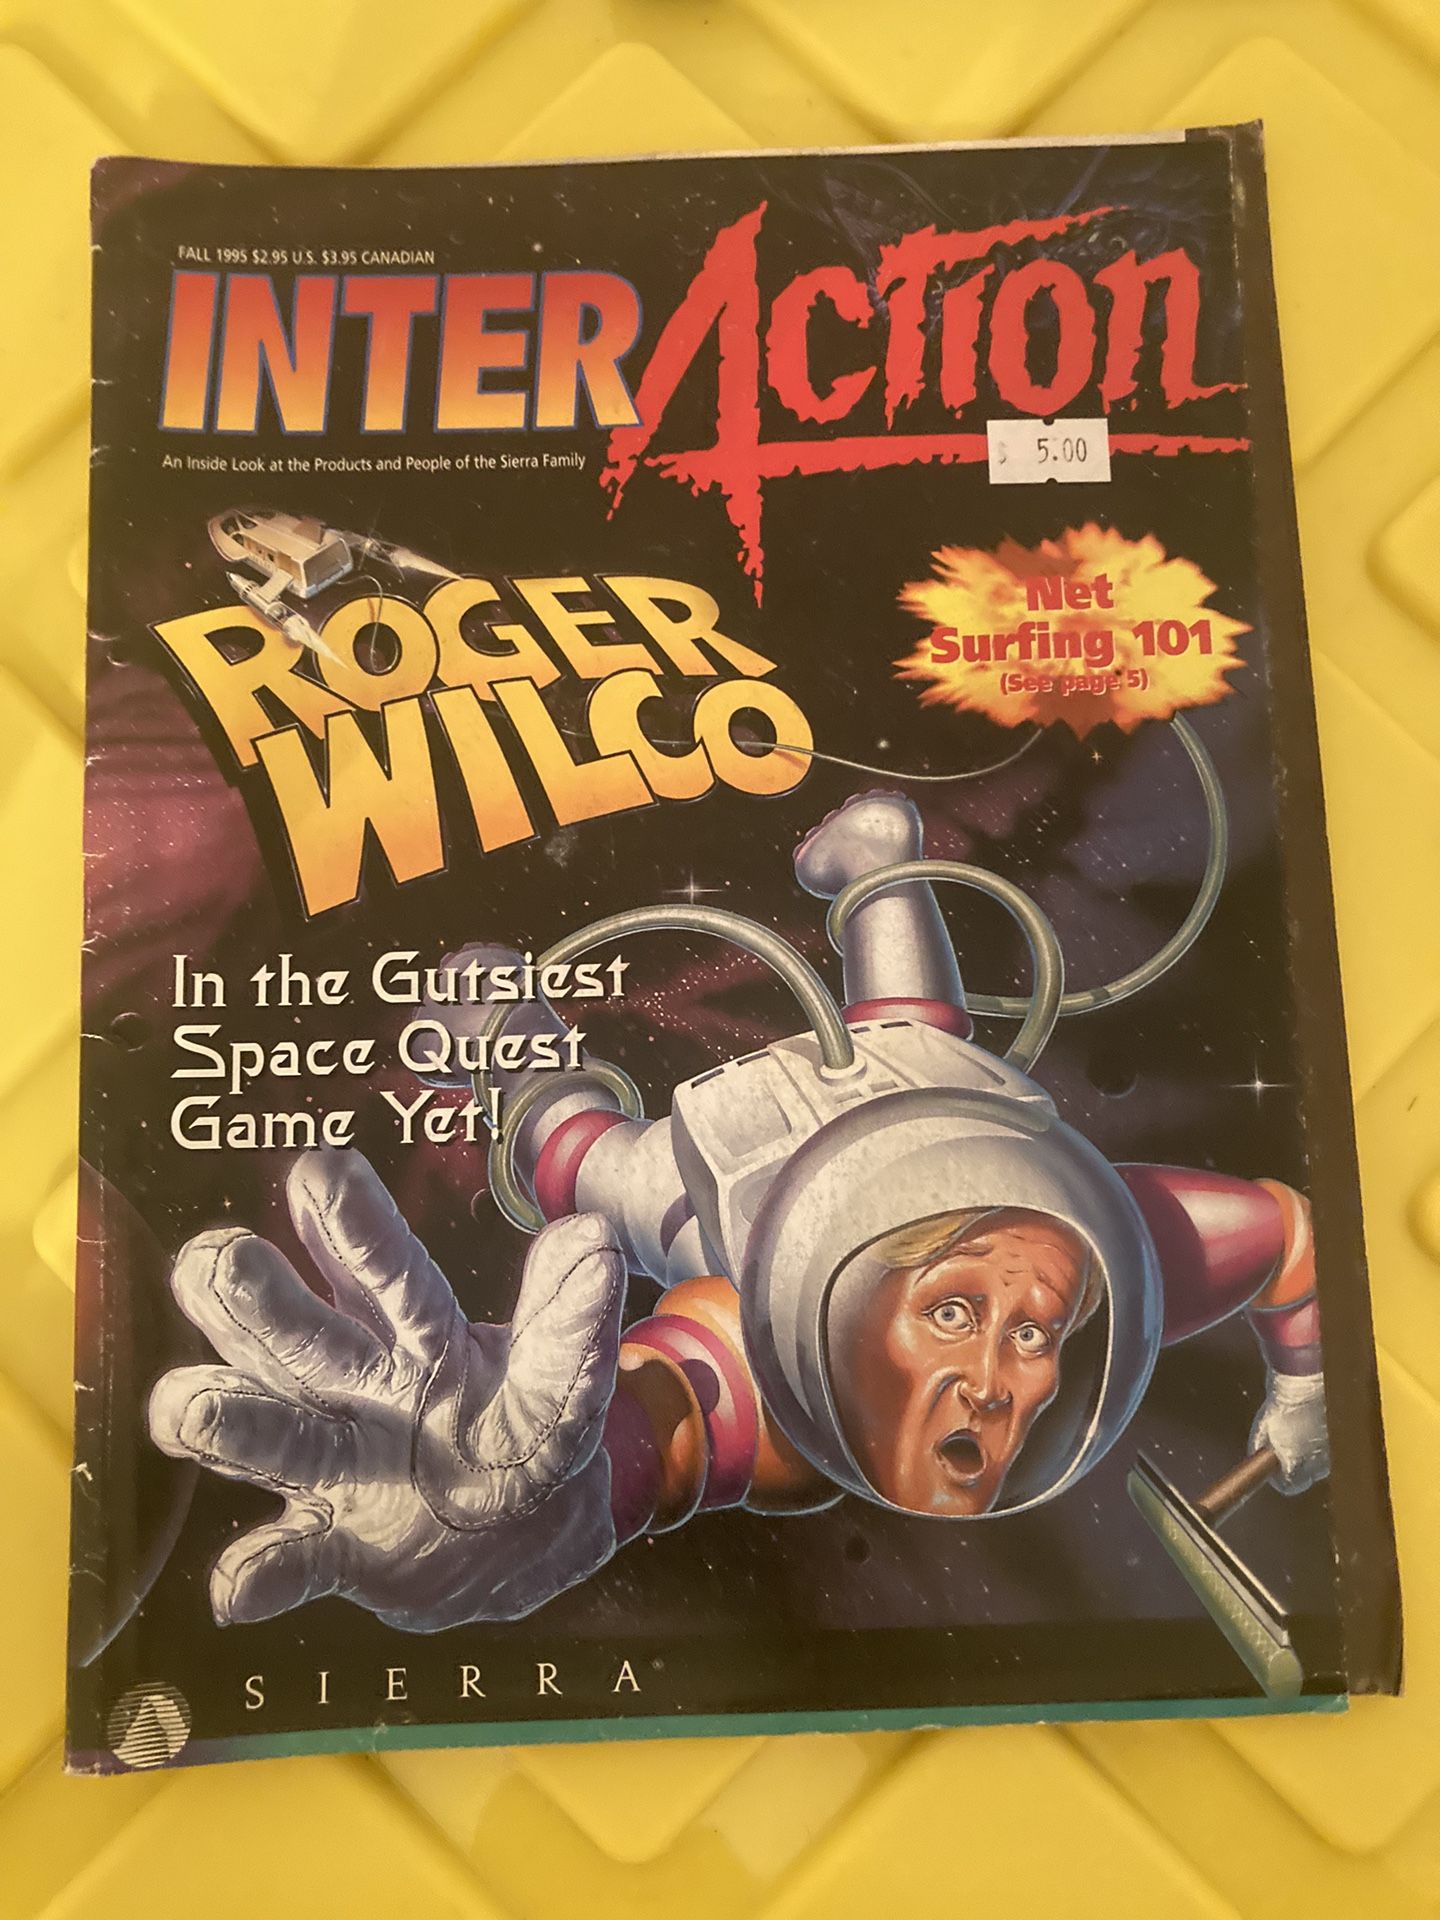 Fall 1995 Vintage Sierra Online InterAction Magazine Gaming Guide